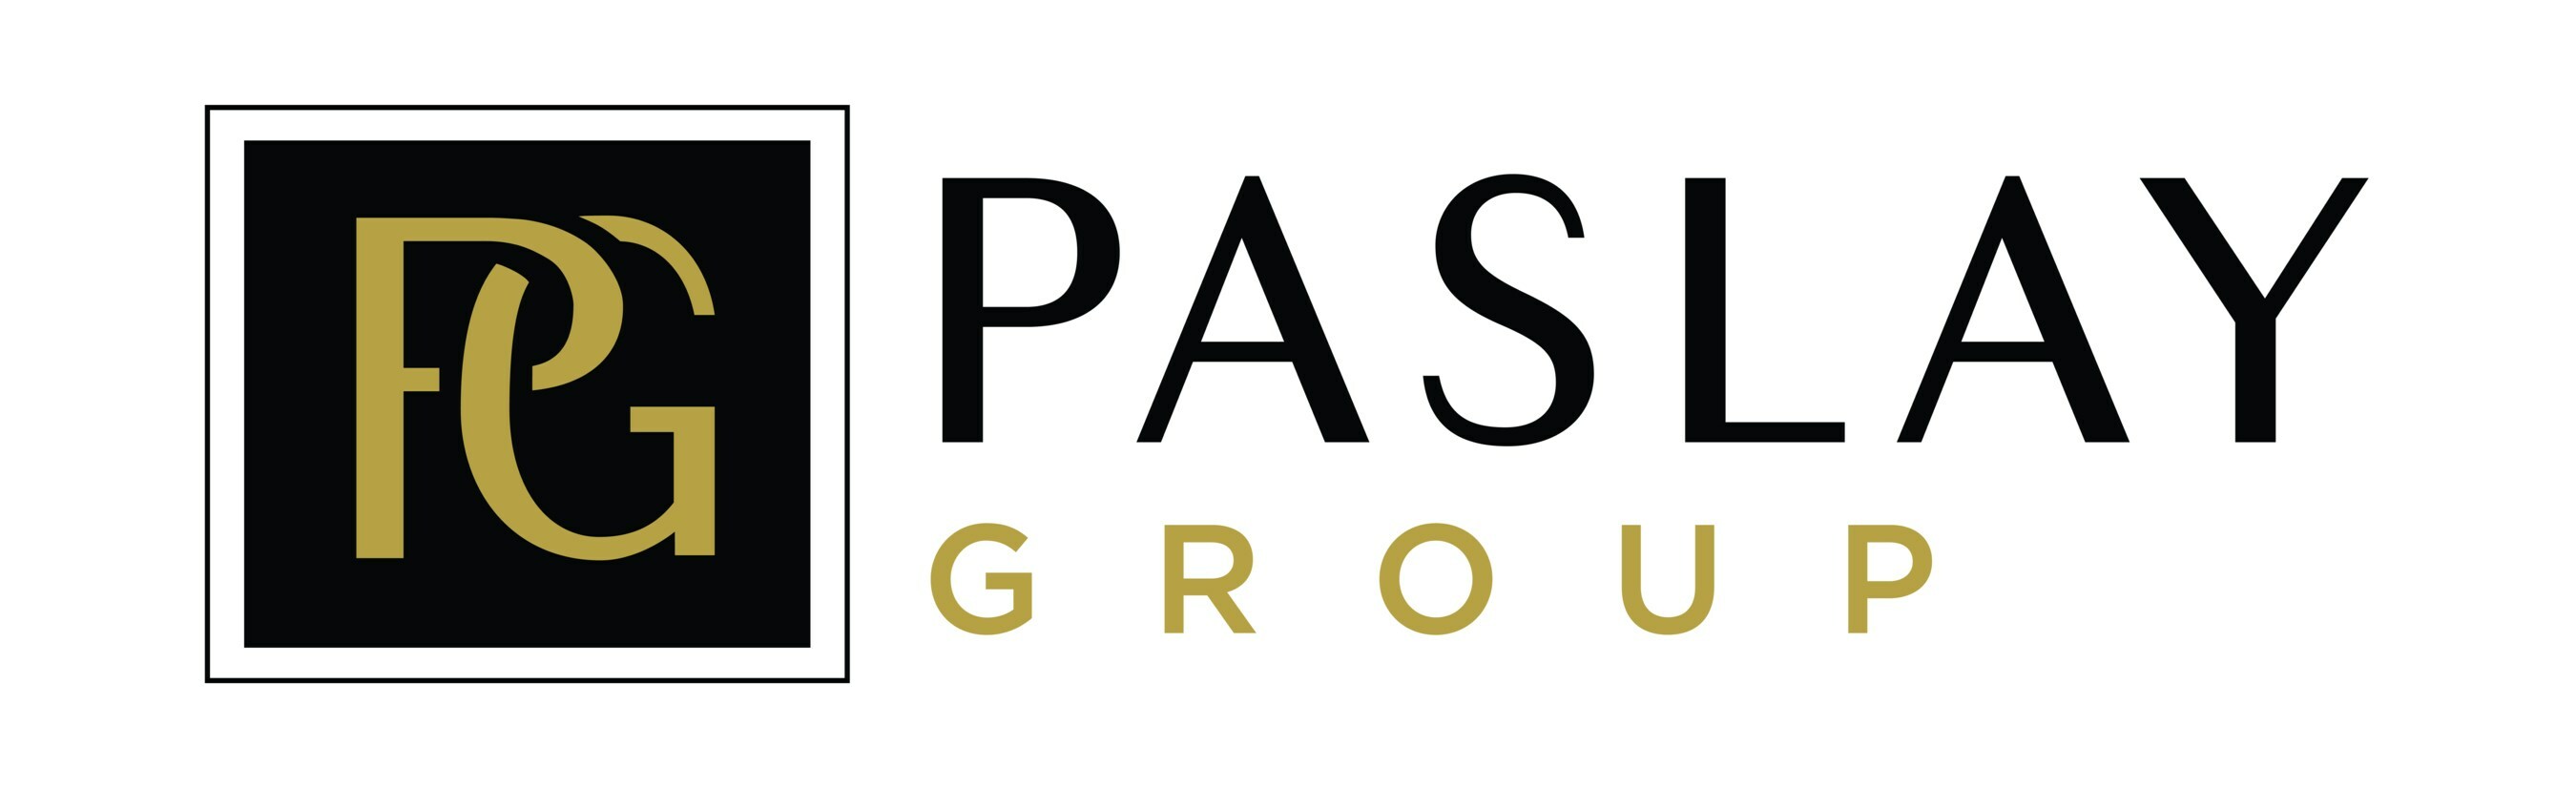 Paslay Group full-color primary horizontal logo